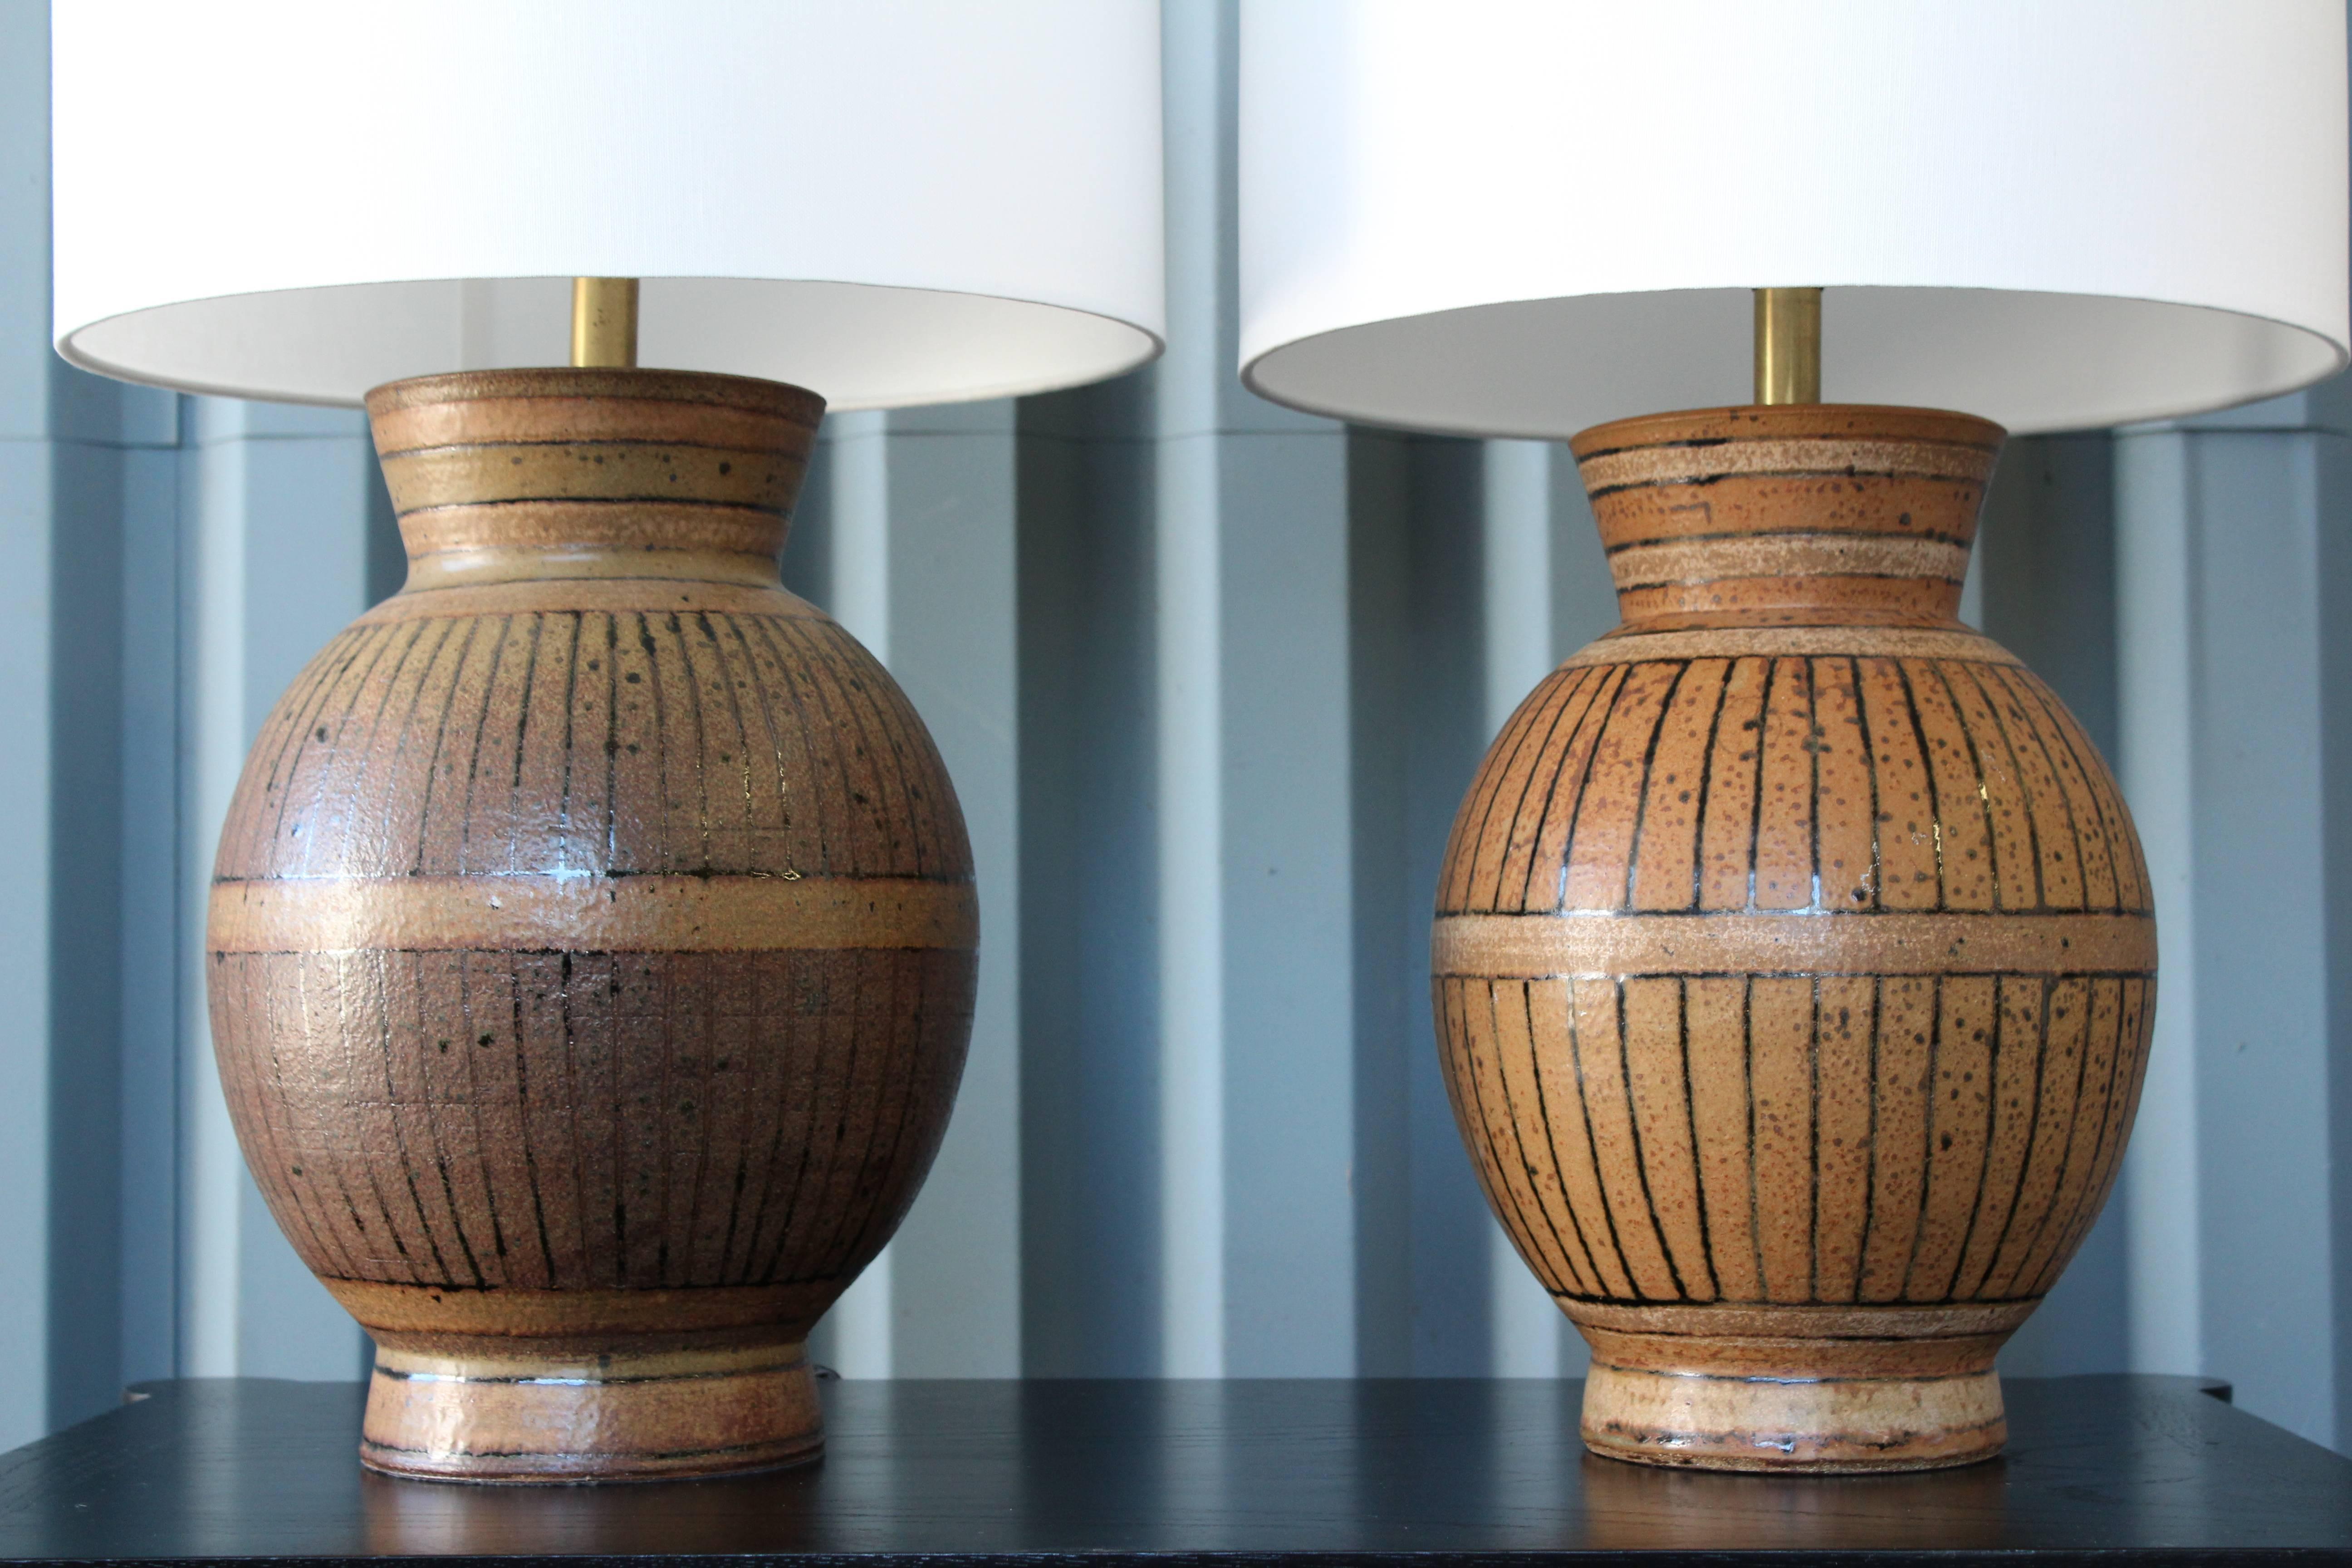 Pair of 1960s stoneware lamps by Brent Bennett. The pair have been recently rewired in brown twisted silk cording and include new white linen shades topped off with a brass finial. Each lamp is signed near the base. One remaining label on the bottom